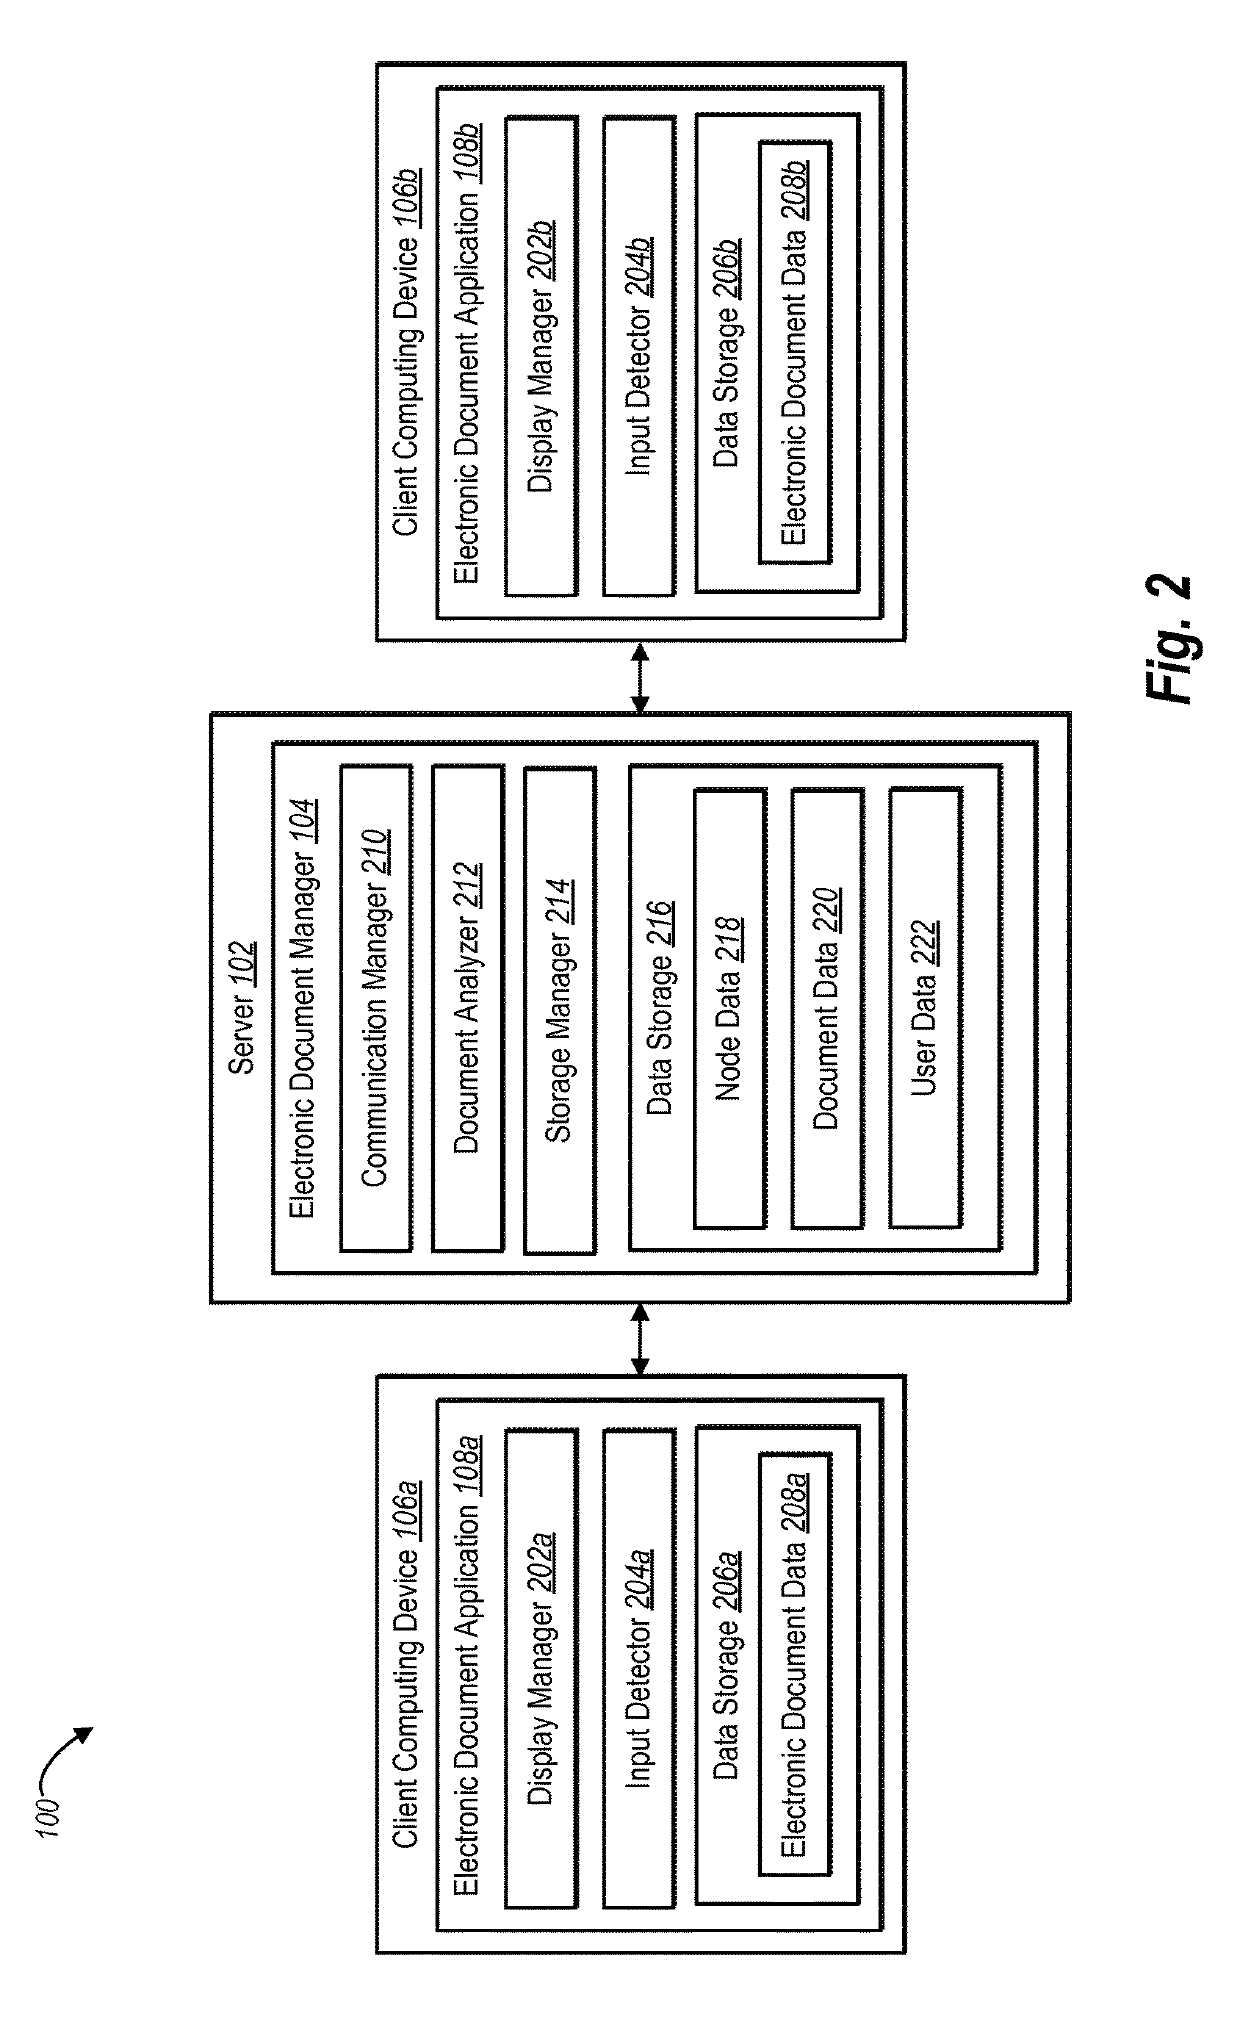 Tracking and facilitating renewal of documents using an electronic signature system